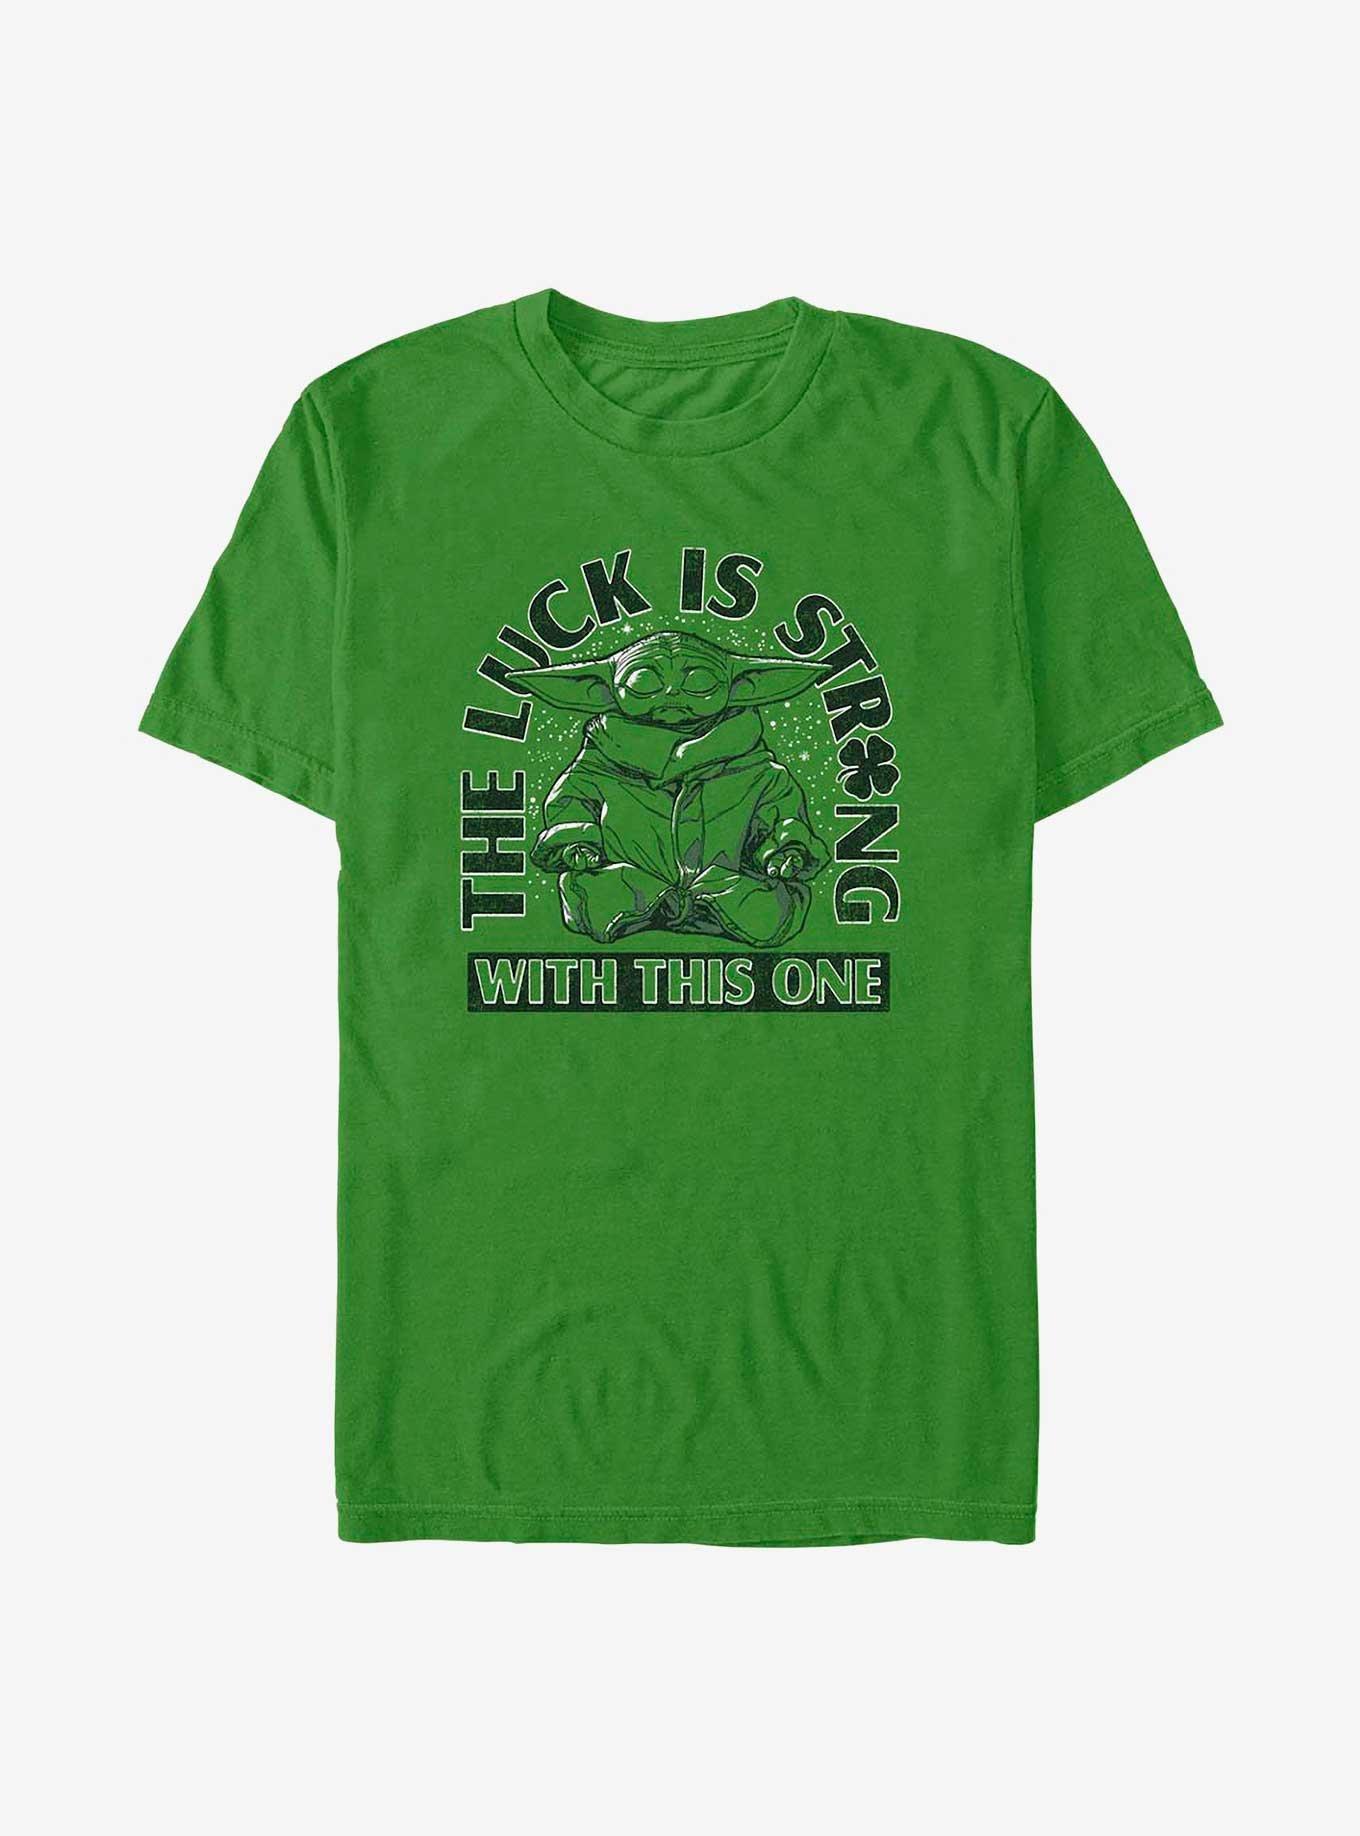 Star Wars The Mandalorian Luck Is Strong T-Shirt, KELLY, hi-res